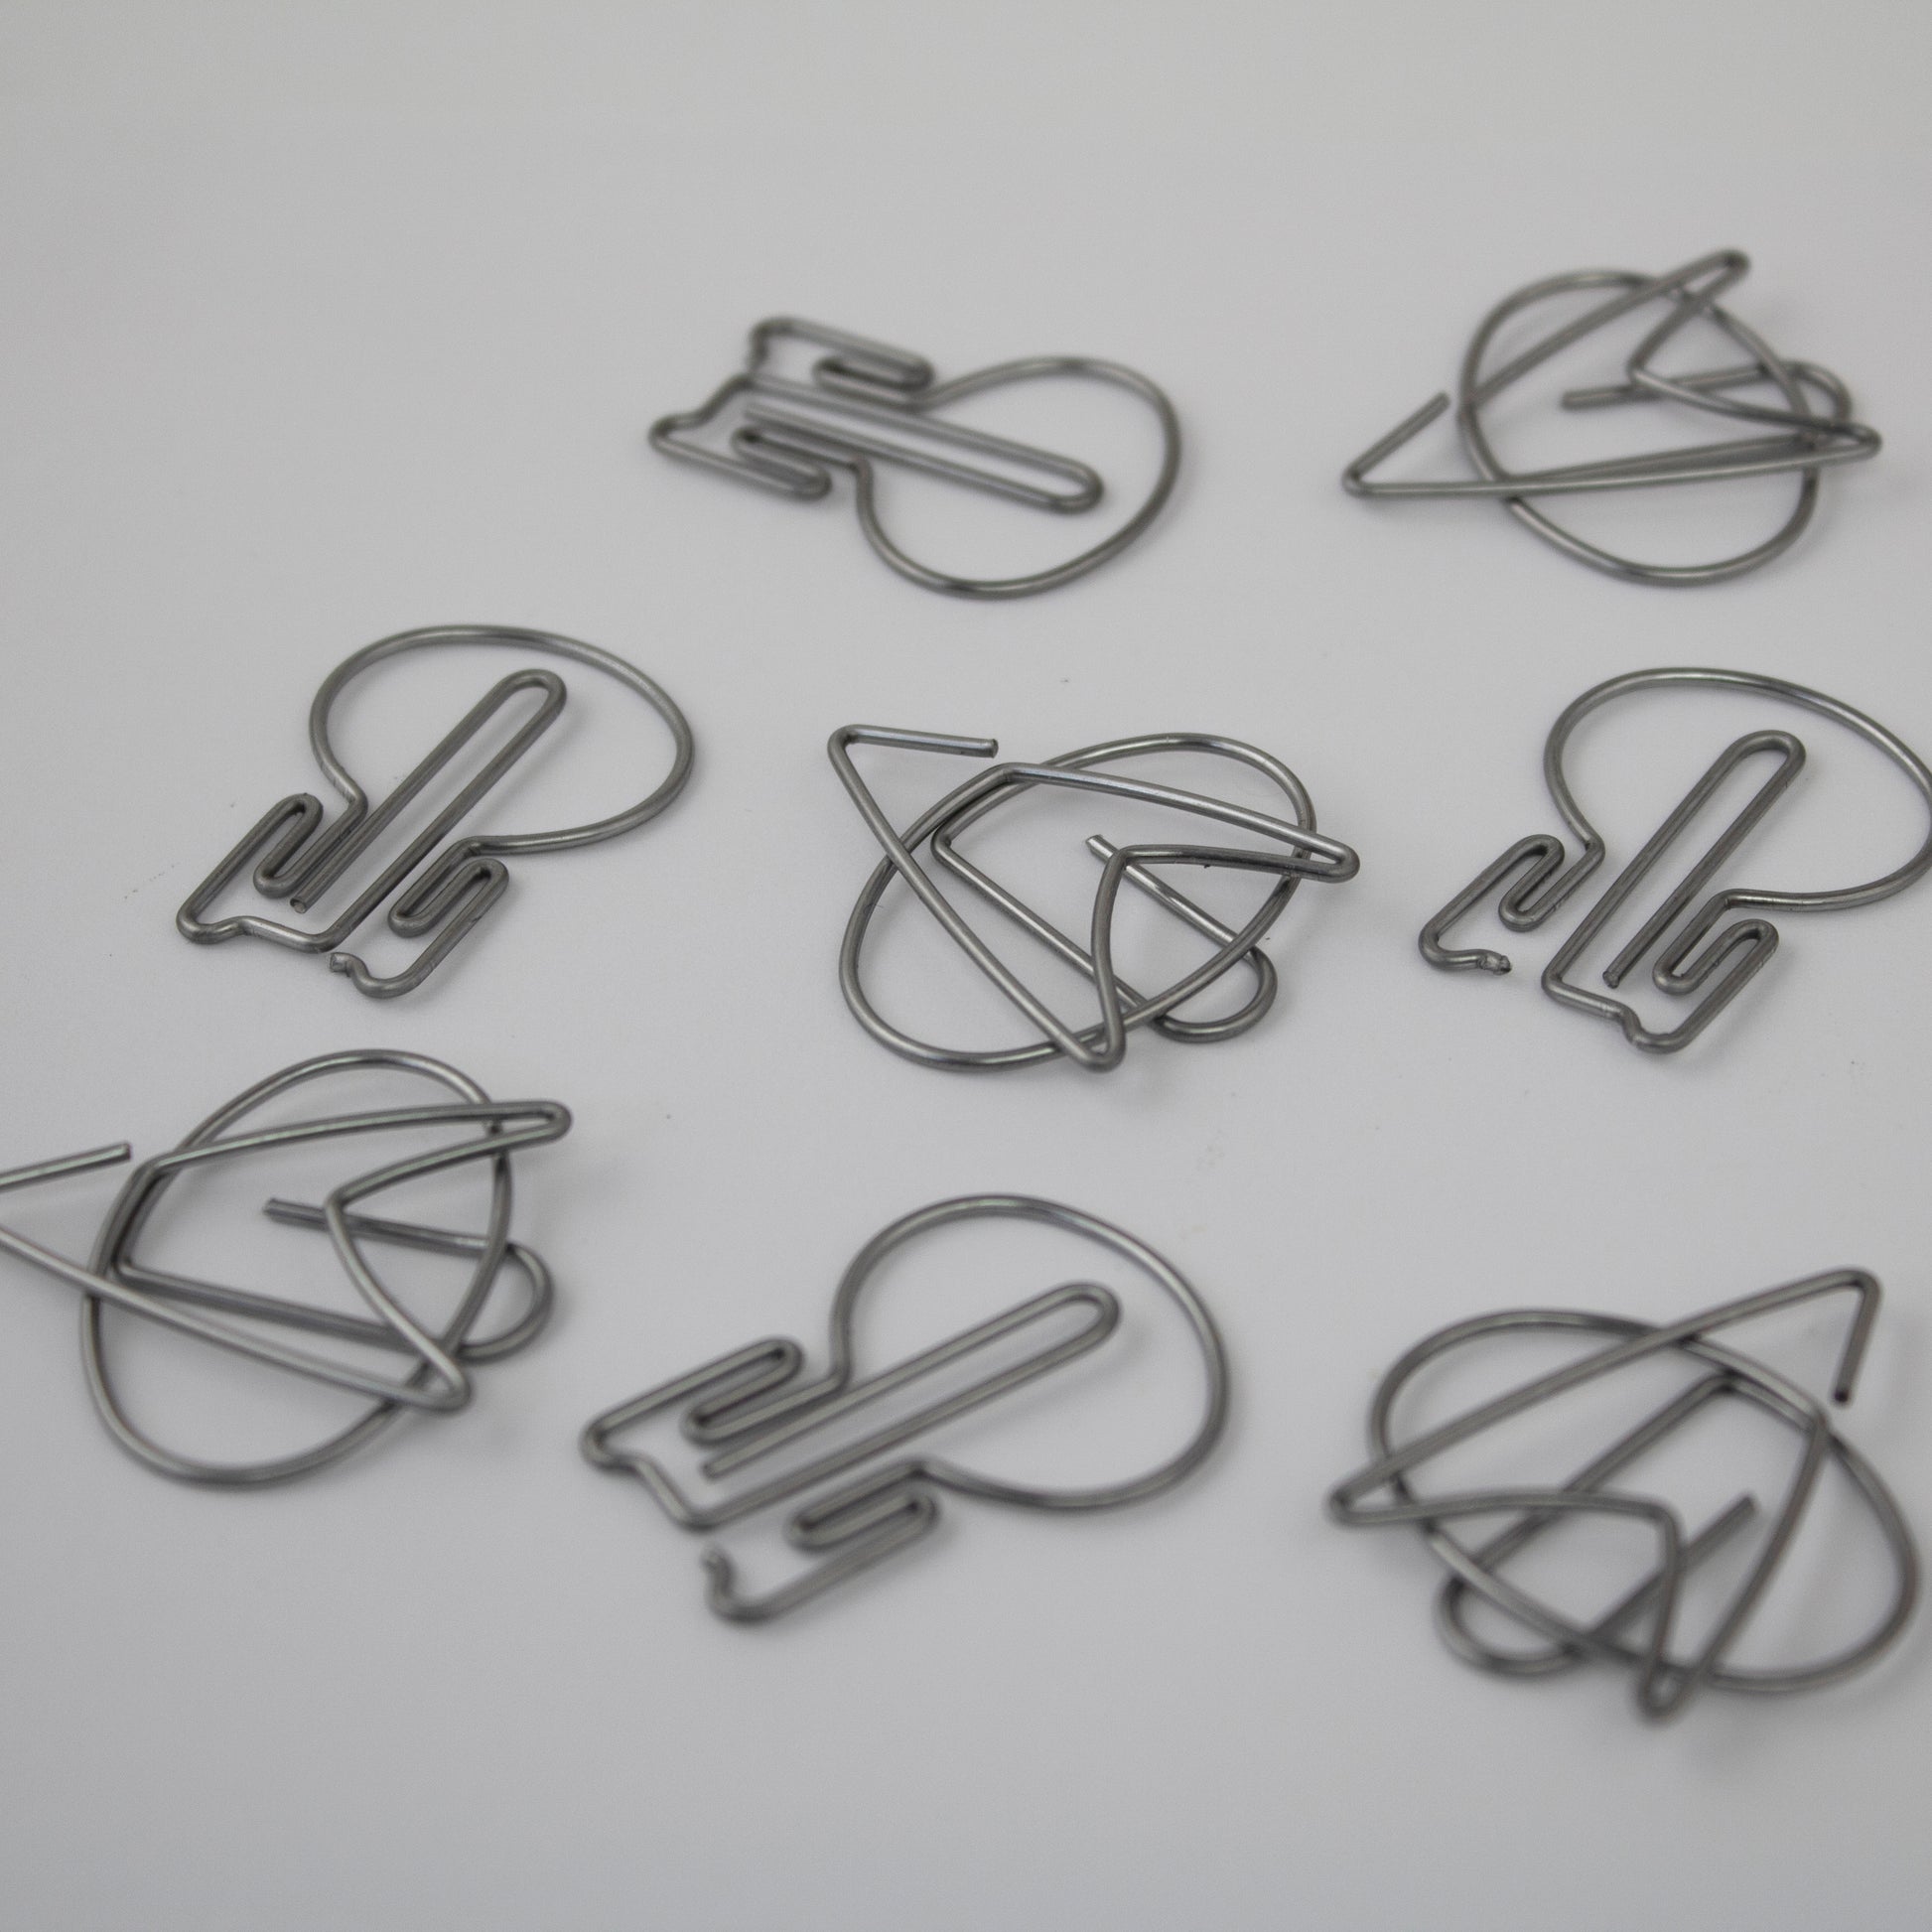 Star Trek TNG Paper Clips - Icon Heroes 